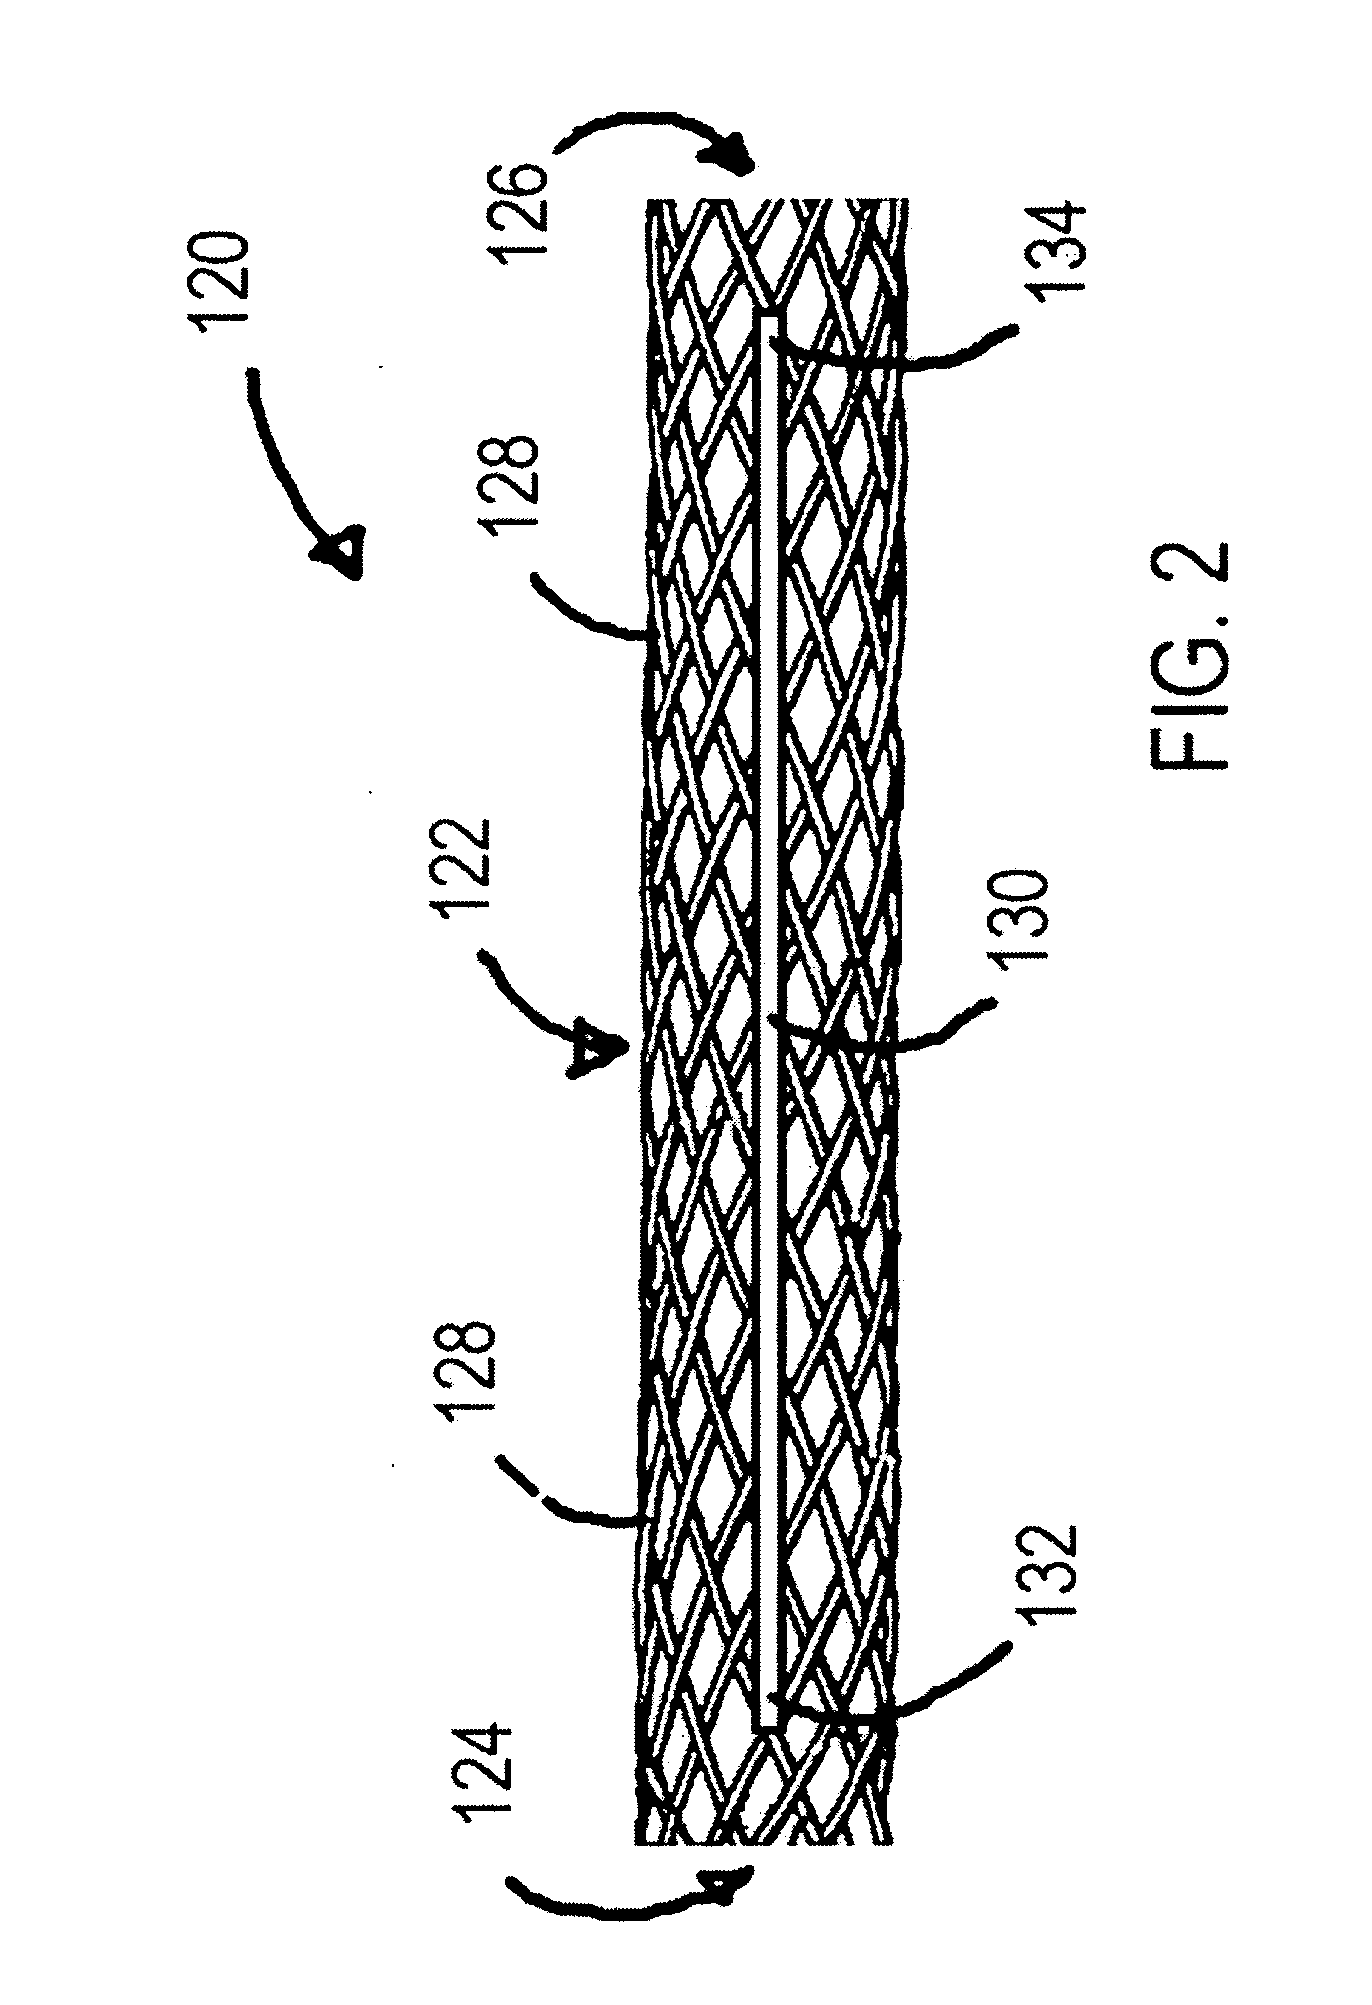 Braided Stent With a Shortenable Tether